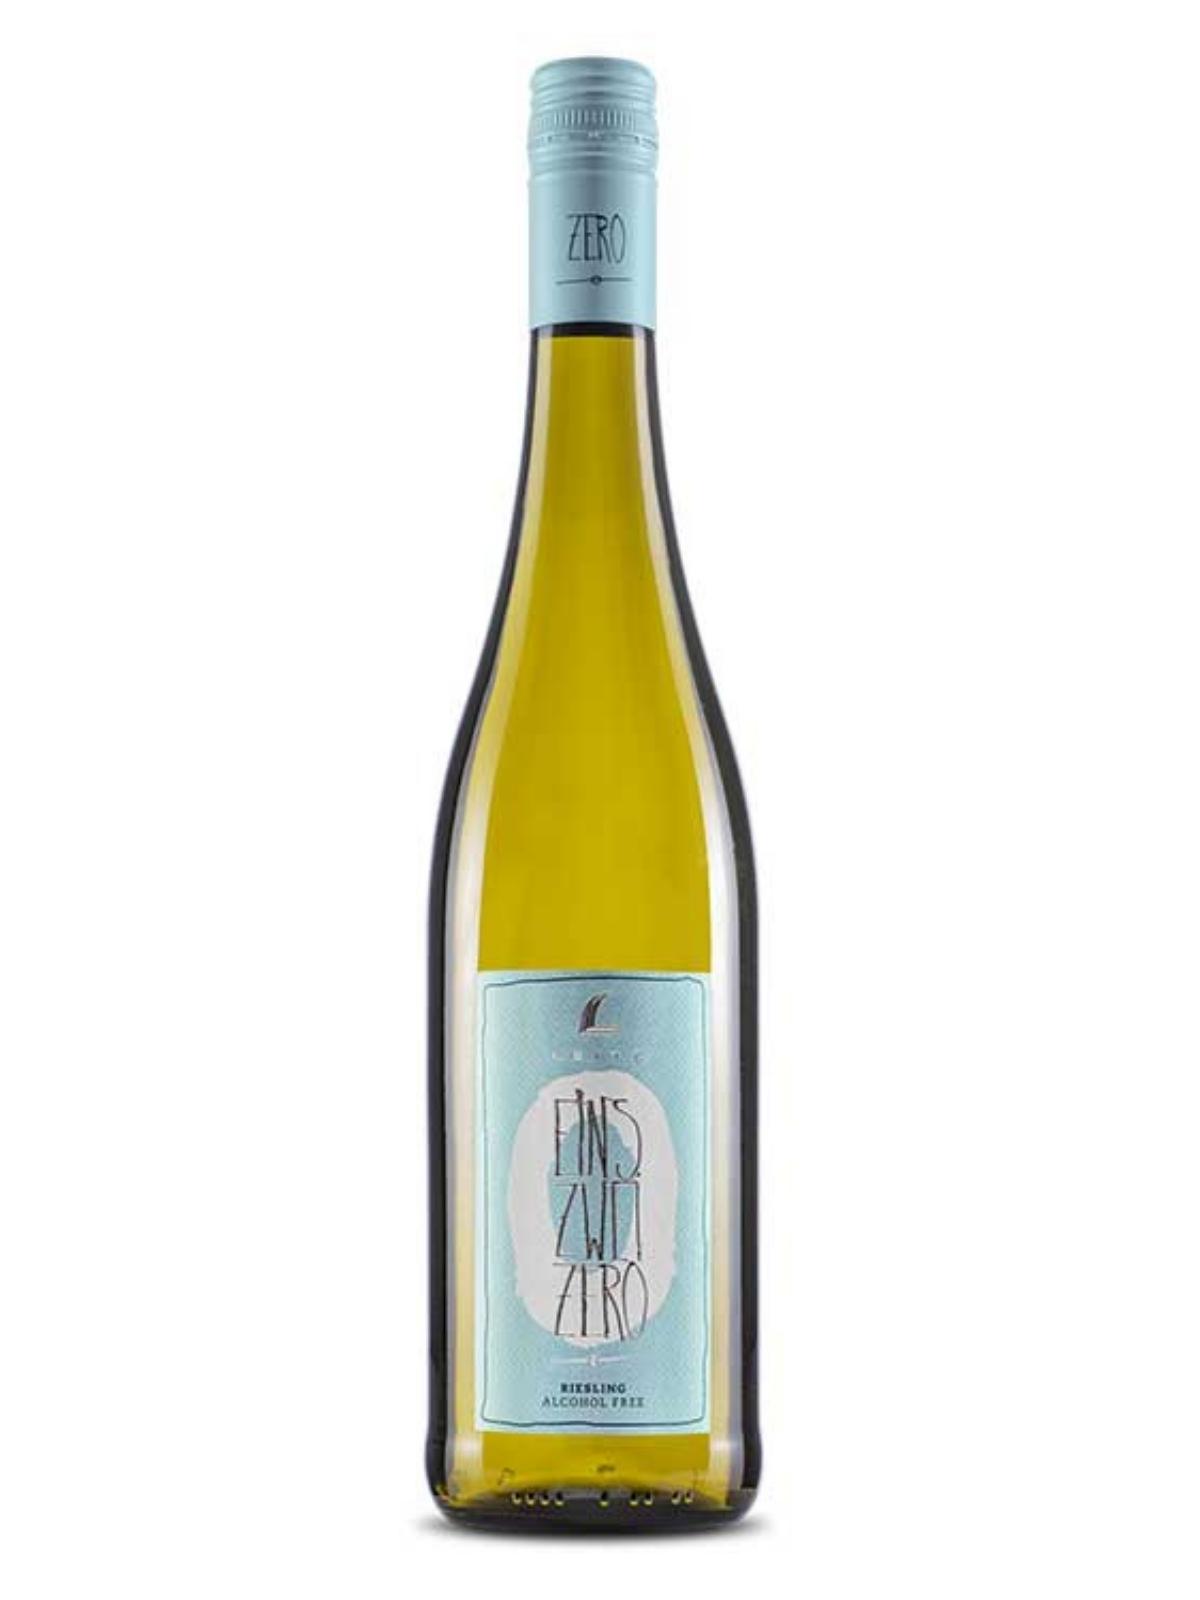 green wine bottle with a light blue label and lid with the branding on the front.